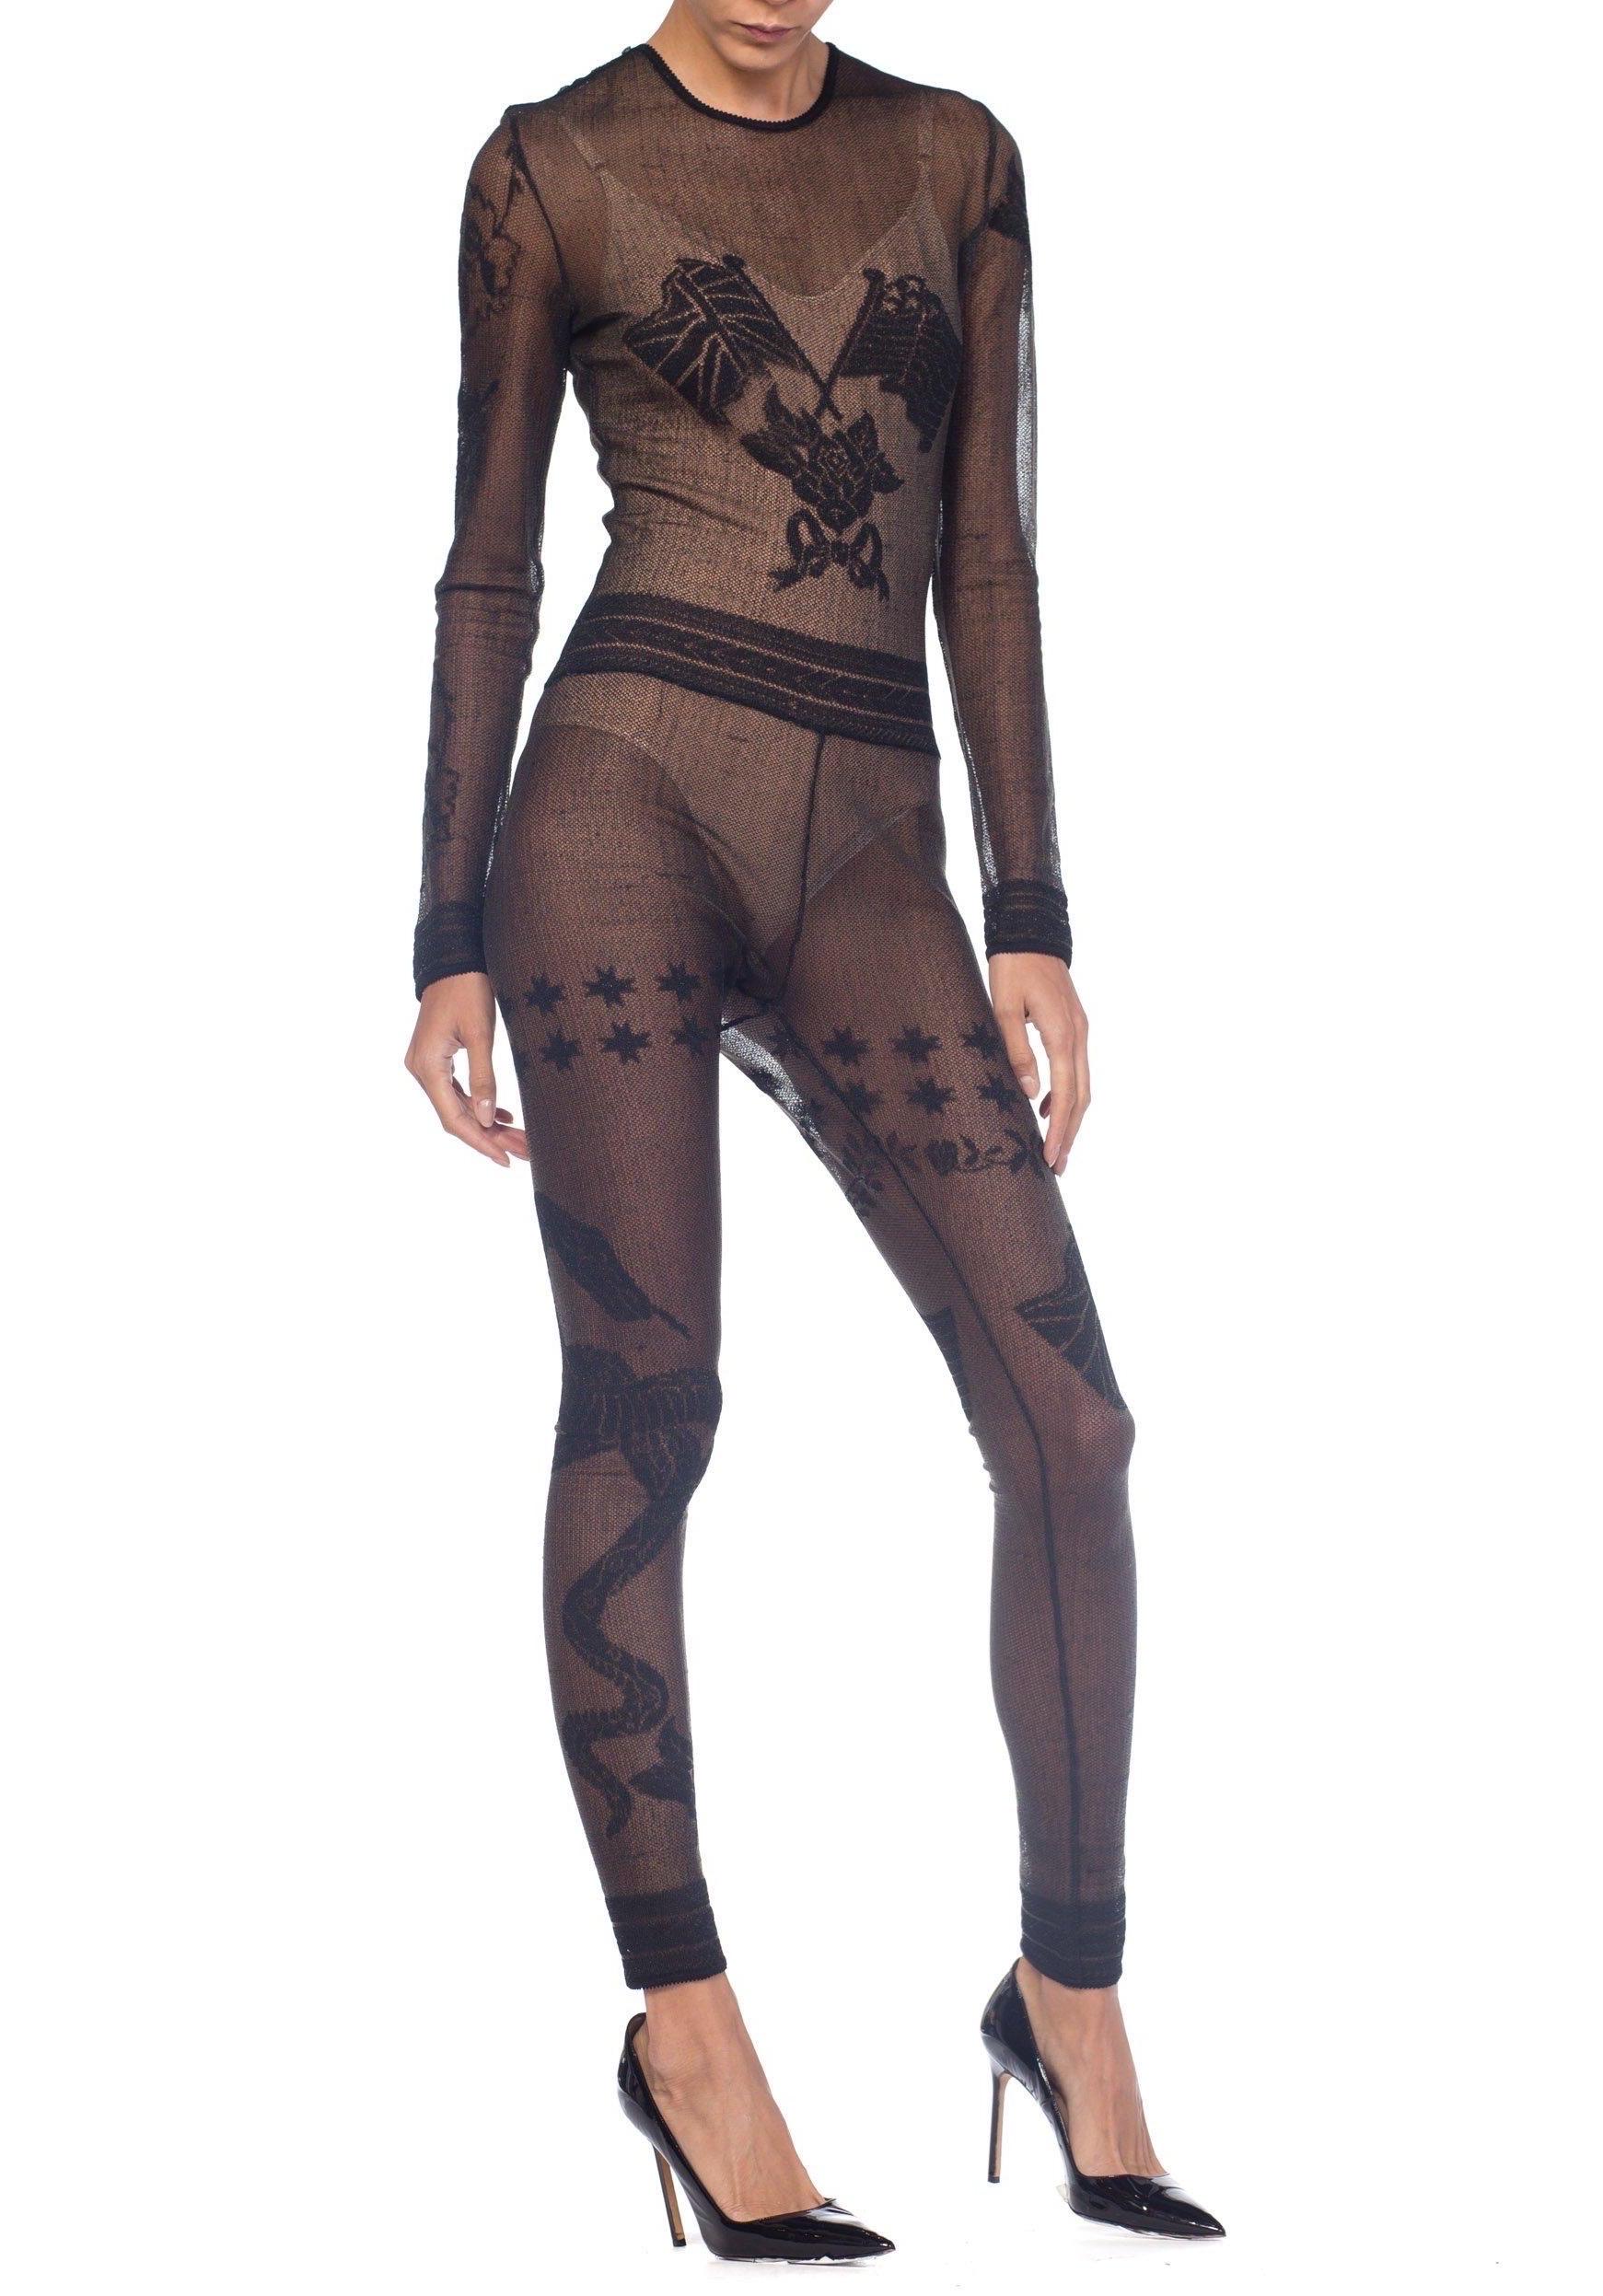 Women's 1990S JOHN GALLIANO Sheer Knit Bodysuit Jumpsuit From The Siouxsie Sphinx Colle For Sale